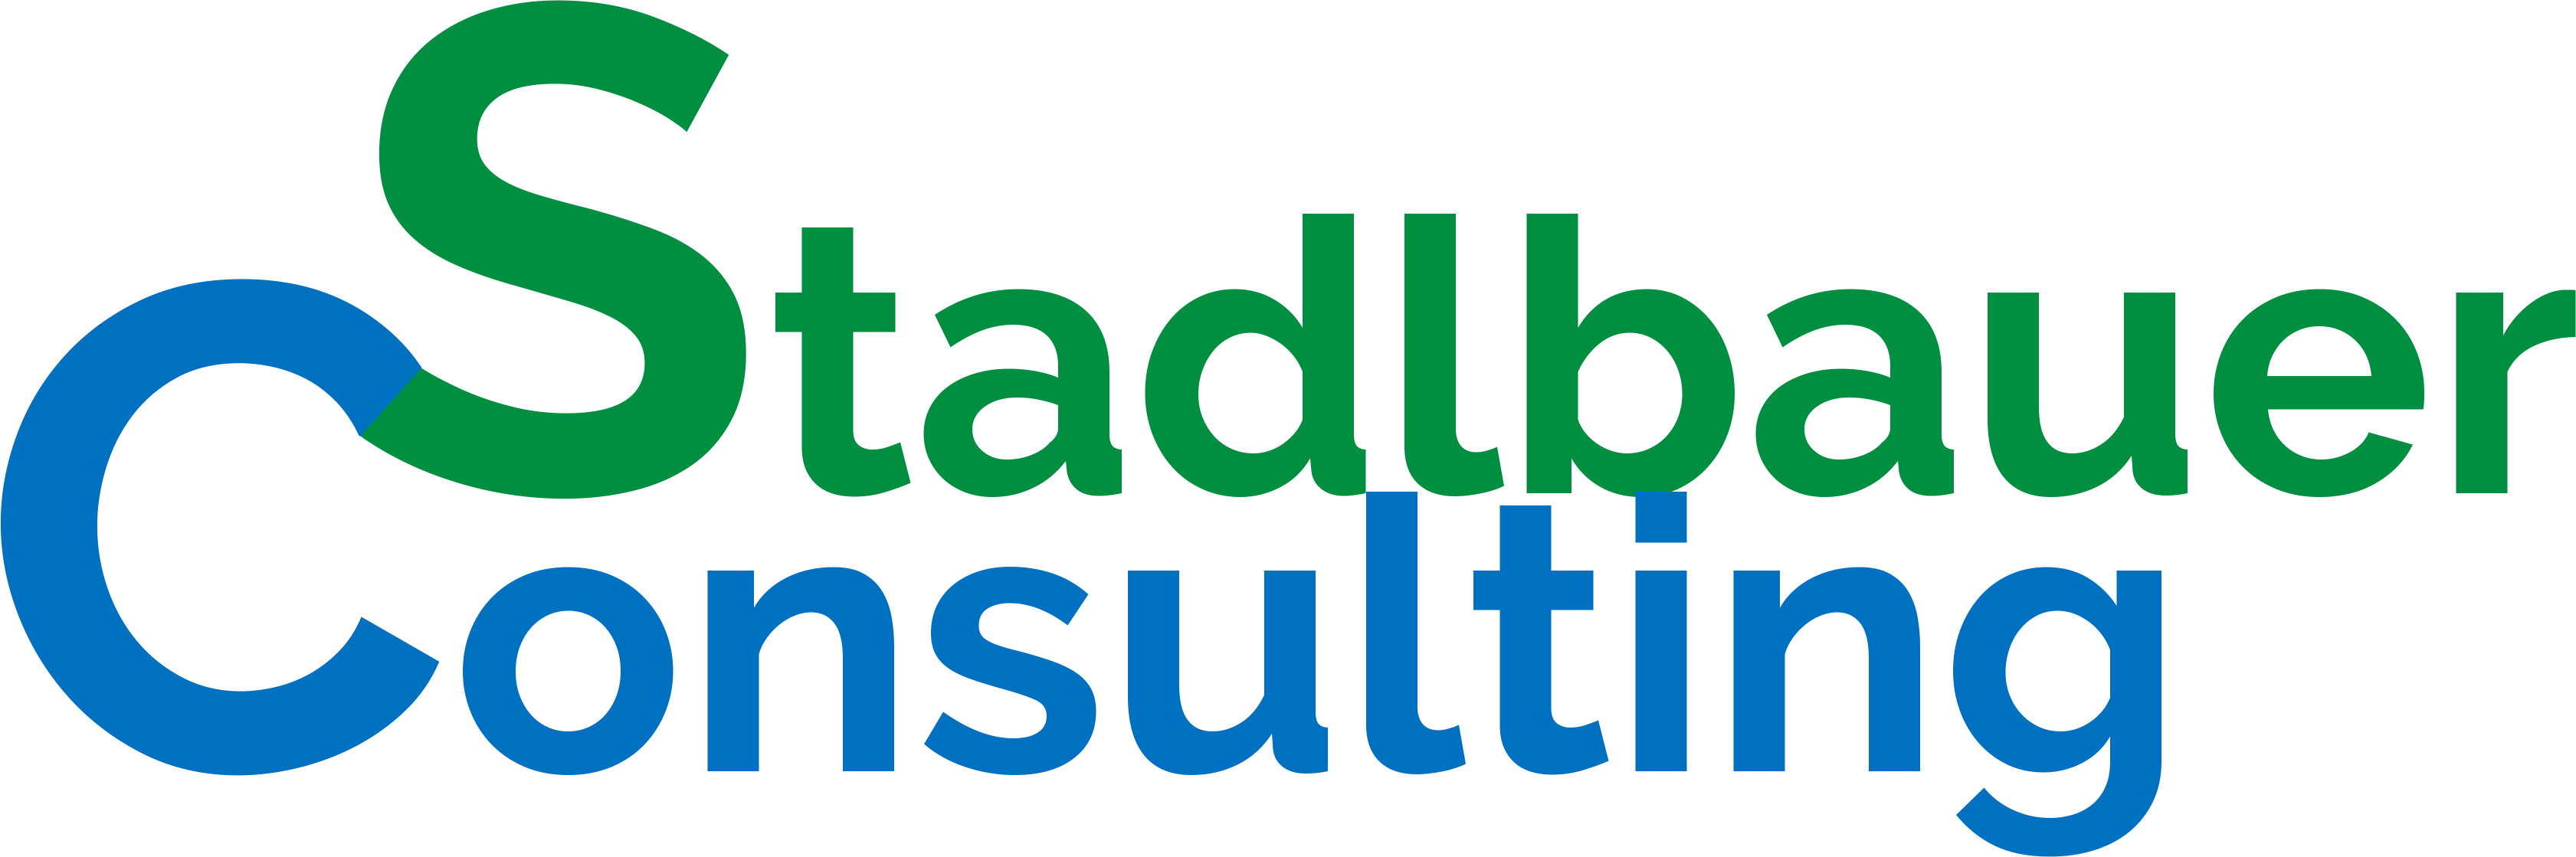 Stadlbauer Consulting